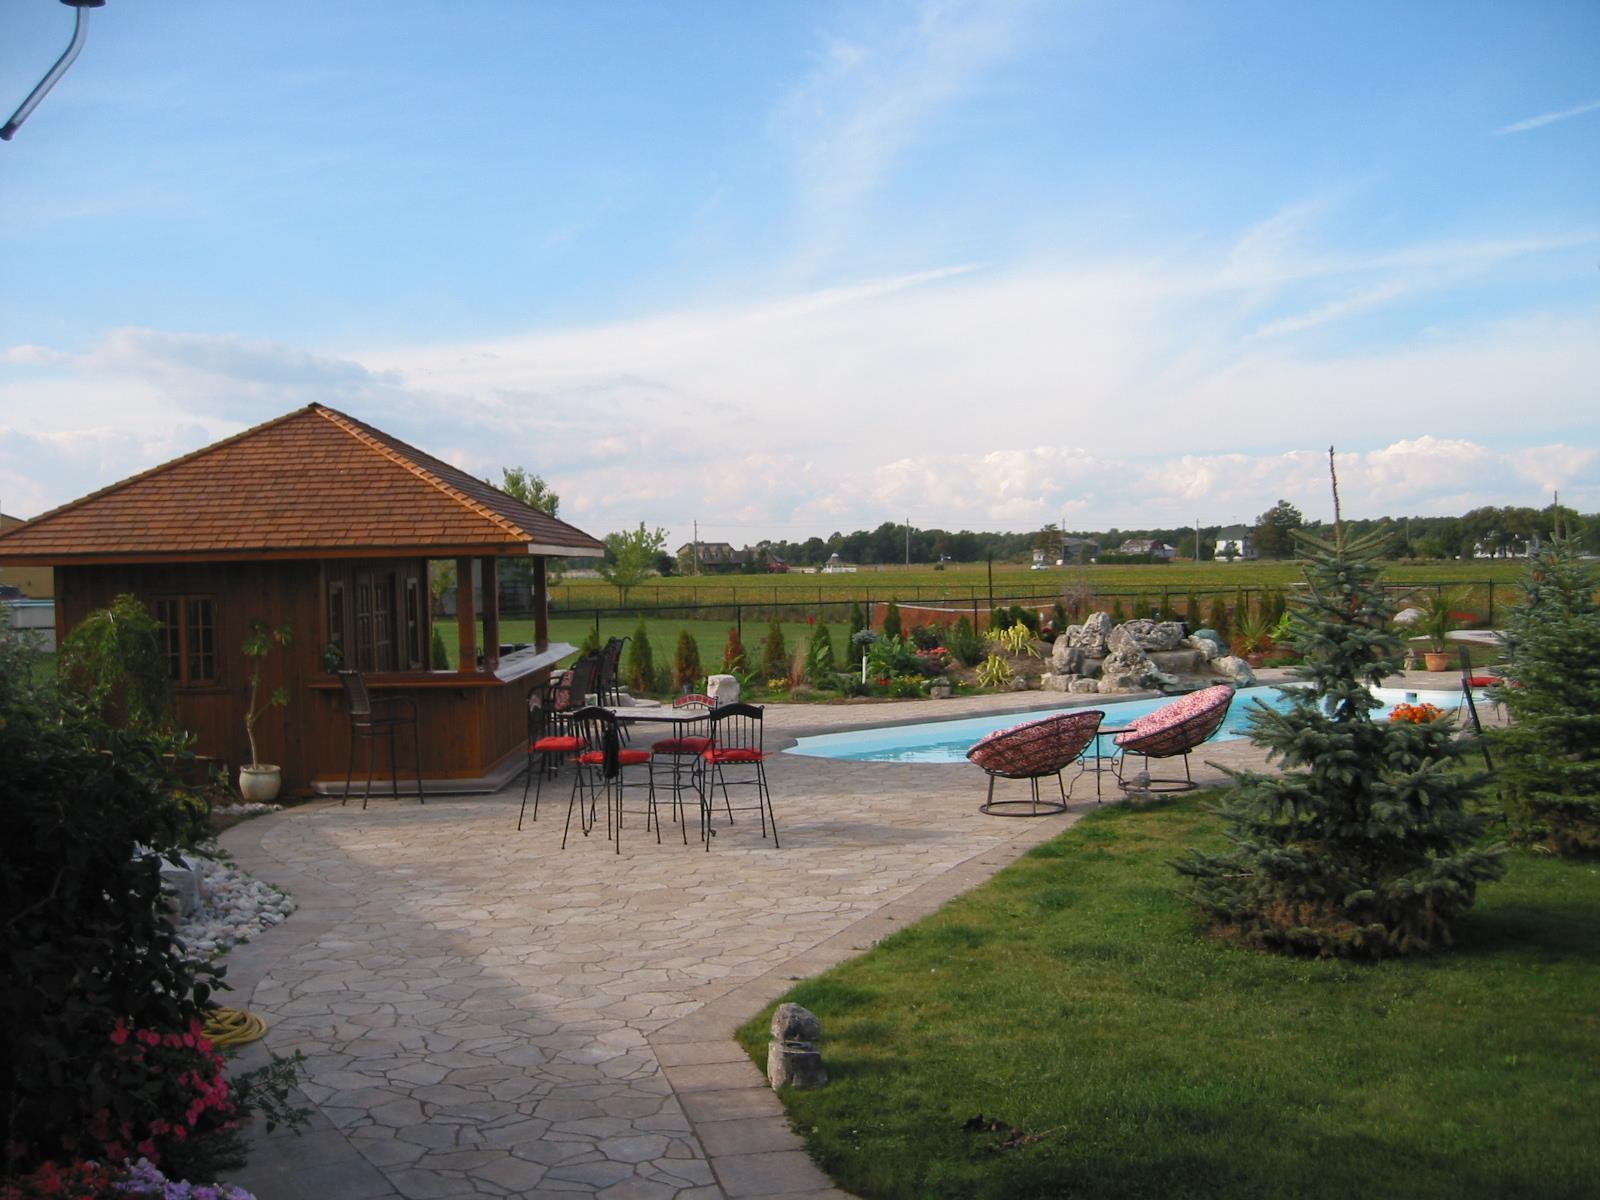 Cedar barside pool cabana 13x16 with double casement windows in Grimsby Ontario. ID number 100816-2.